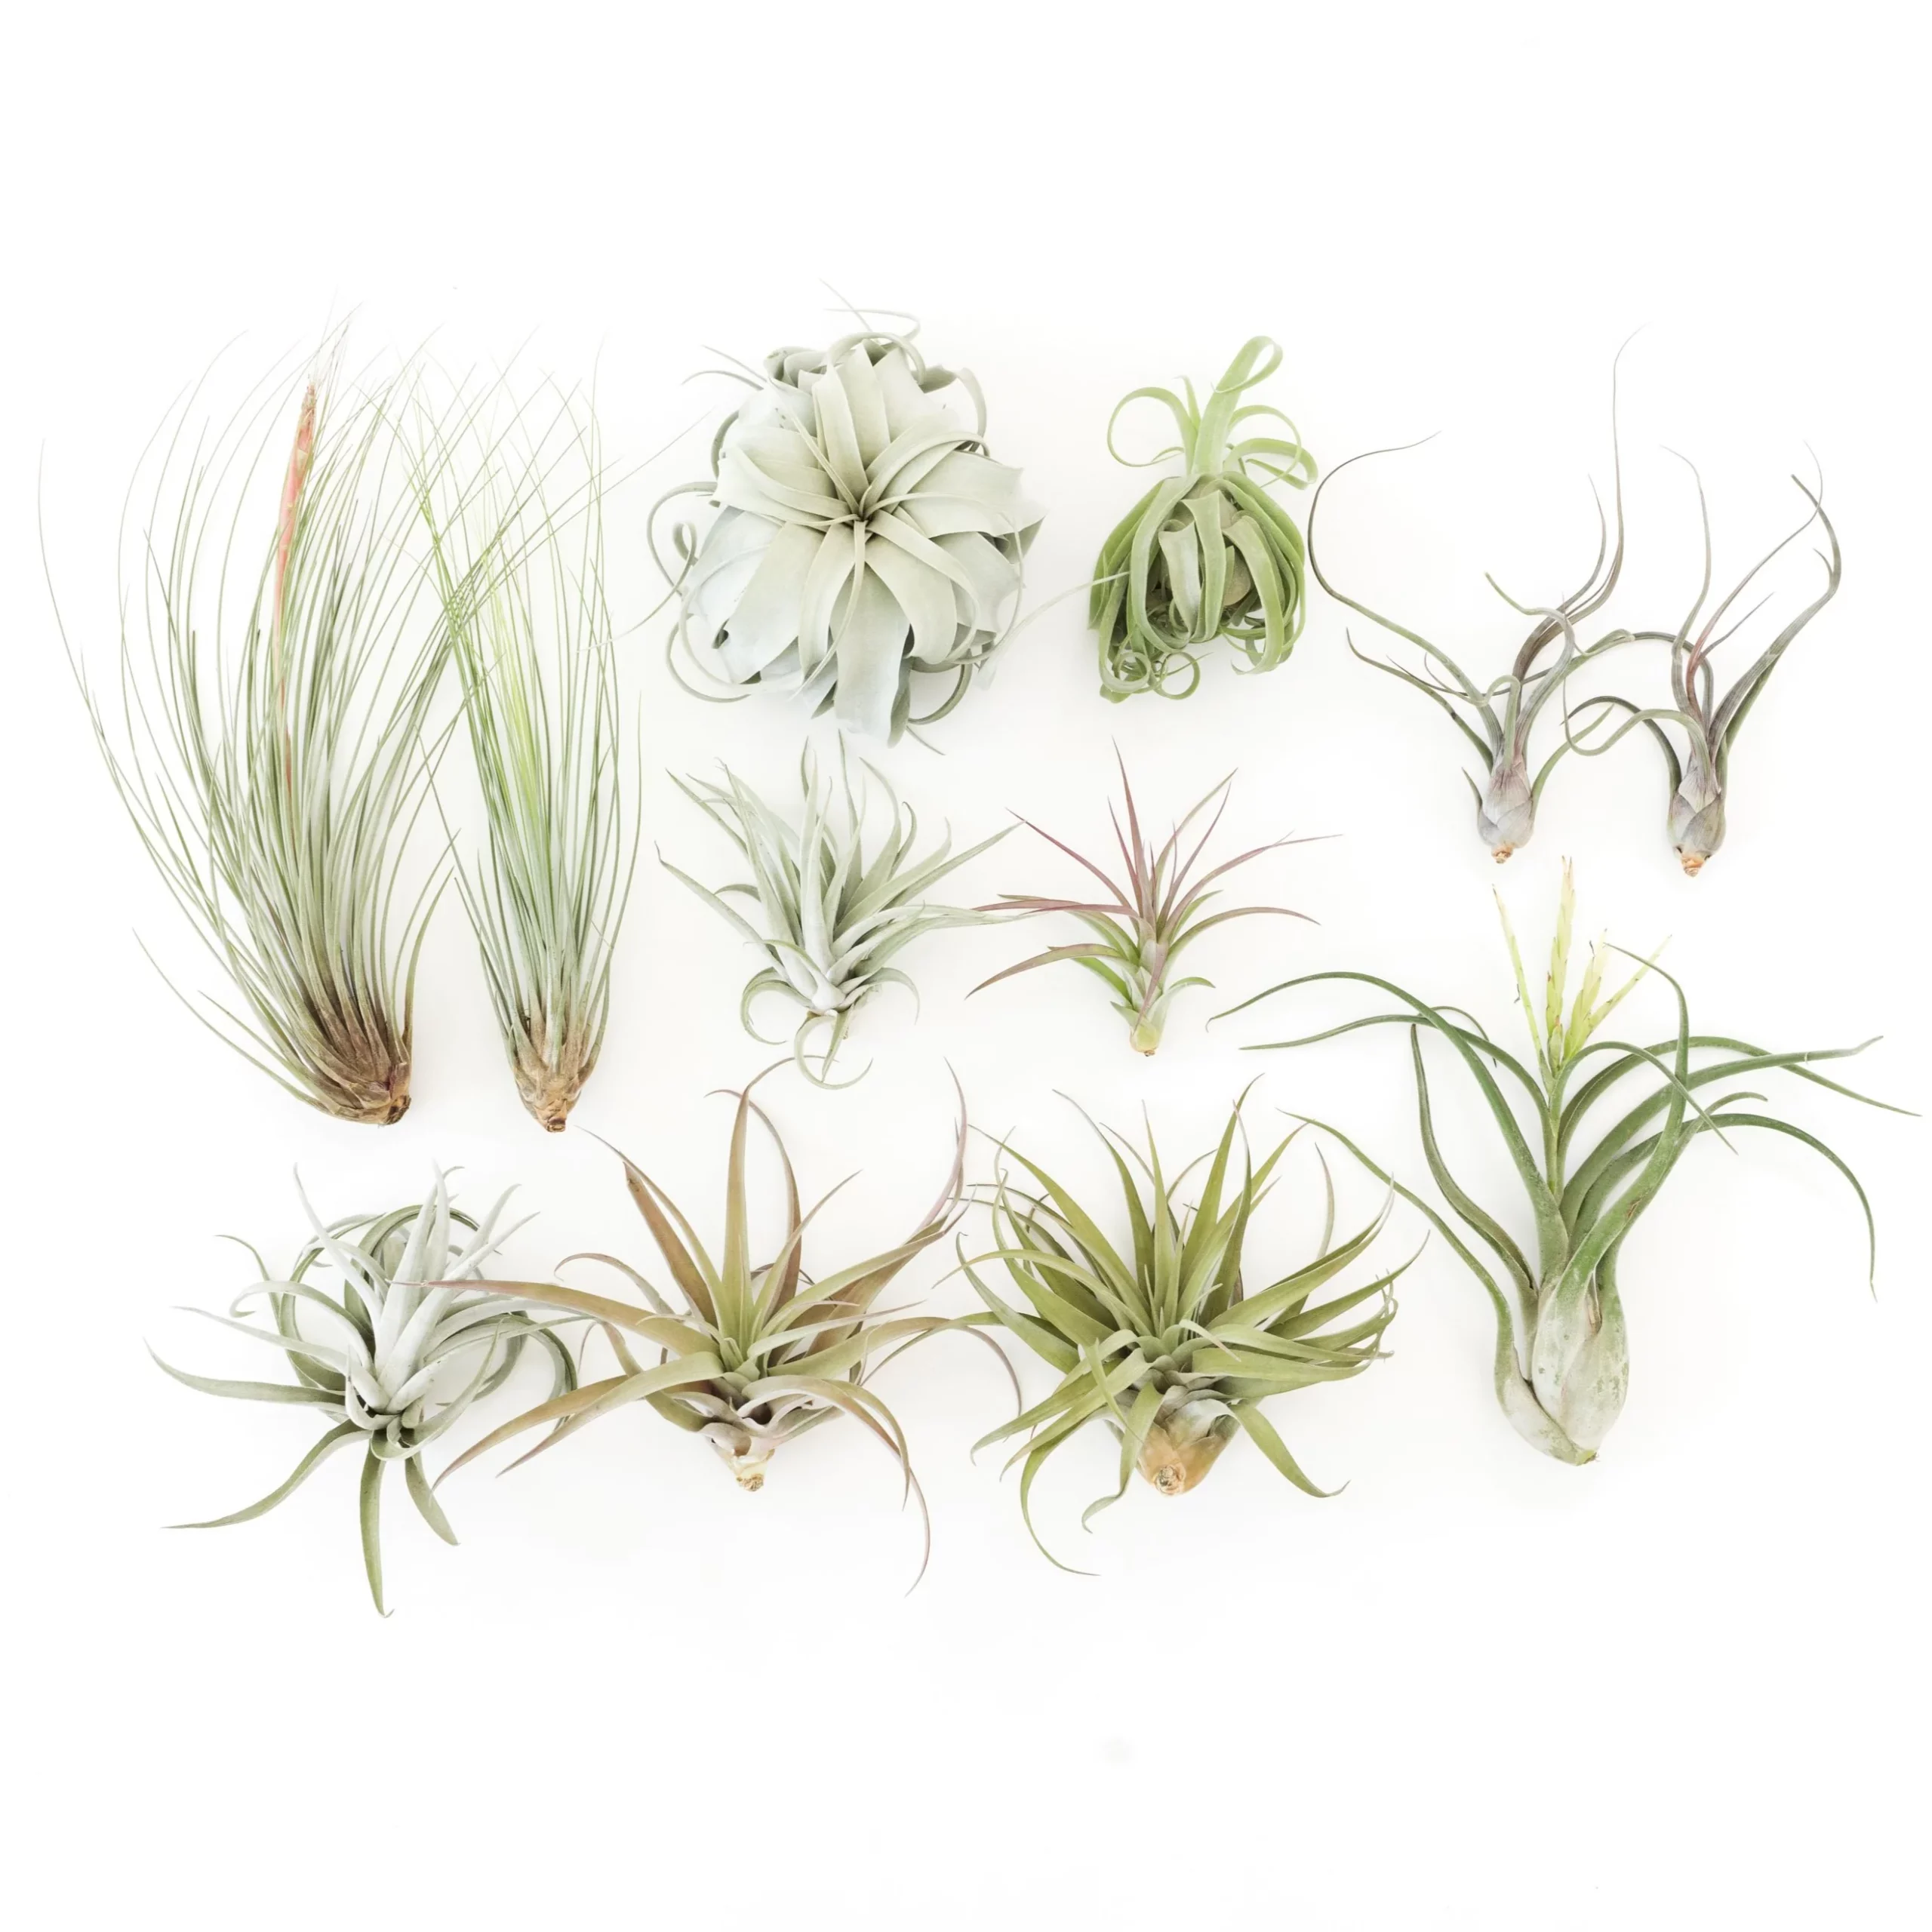 Several different air plants laying on a white background.